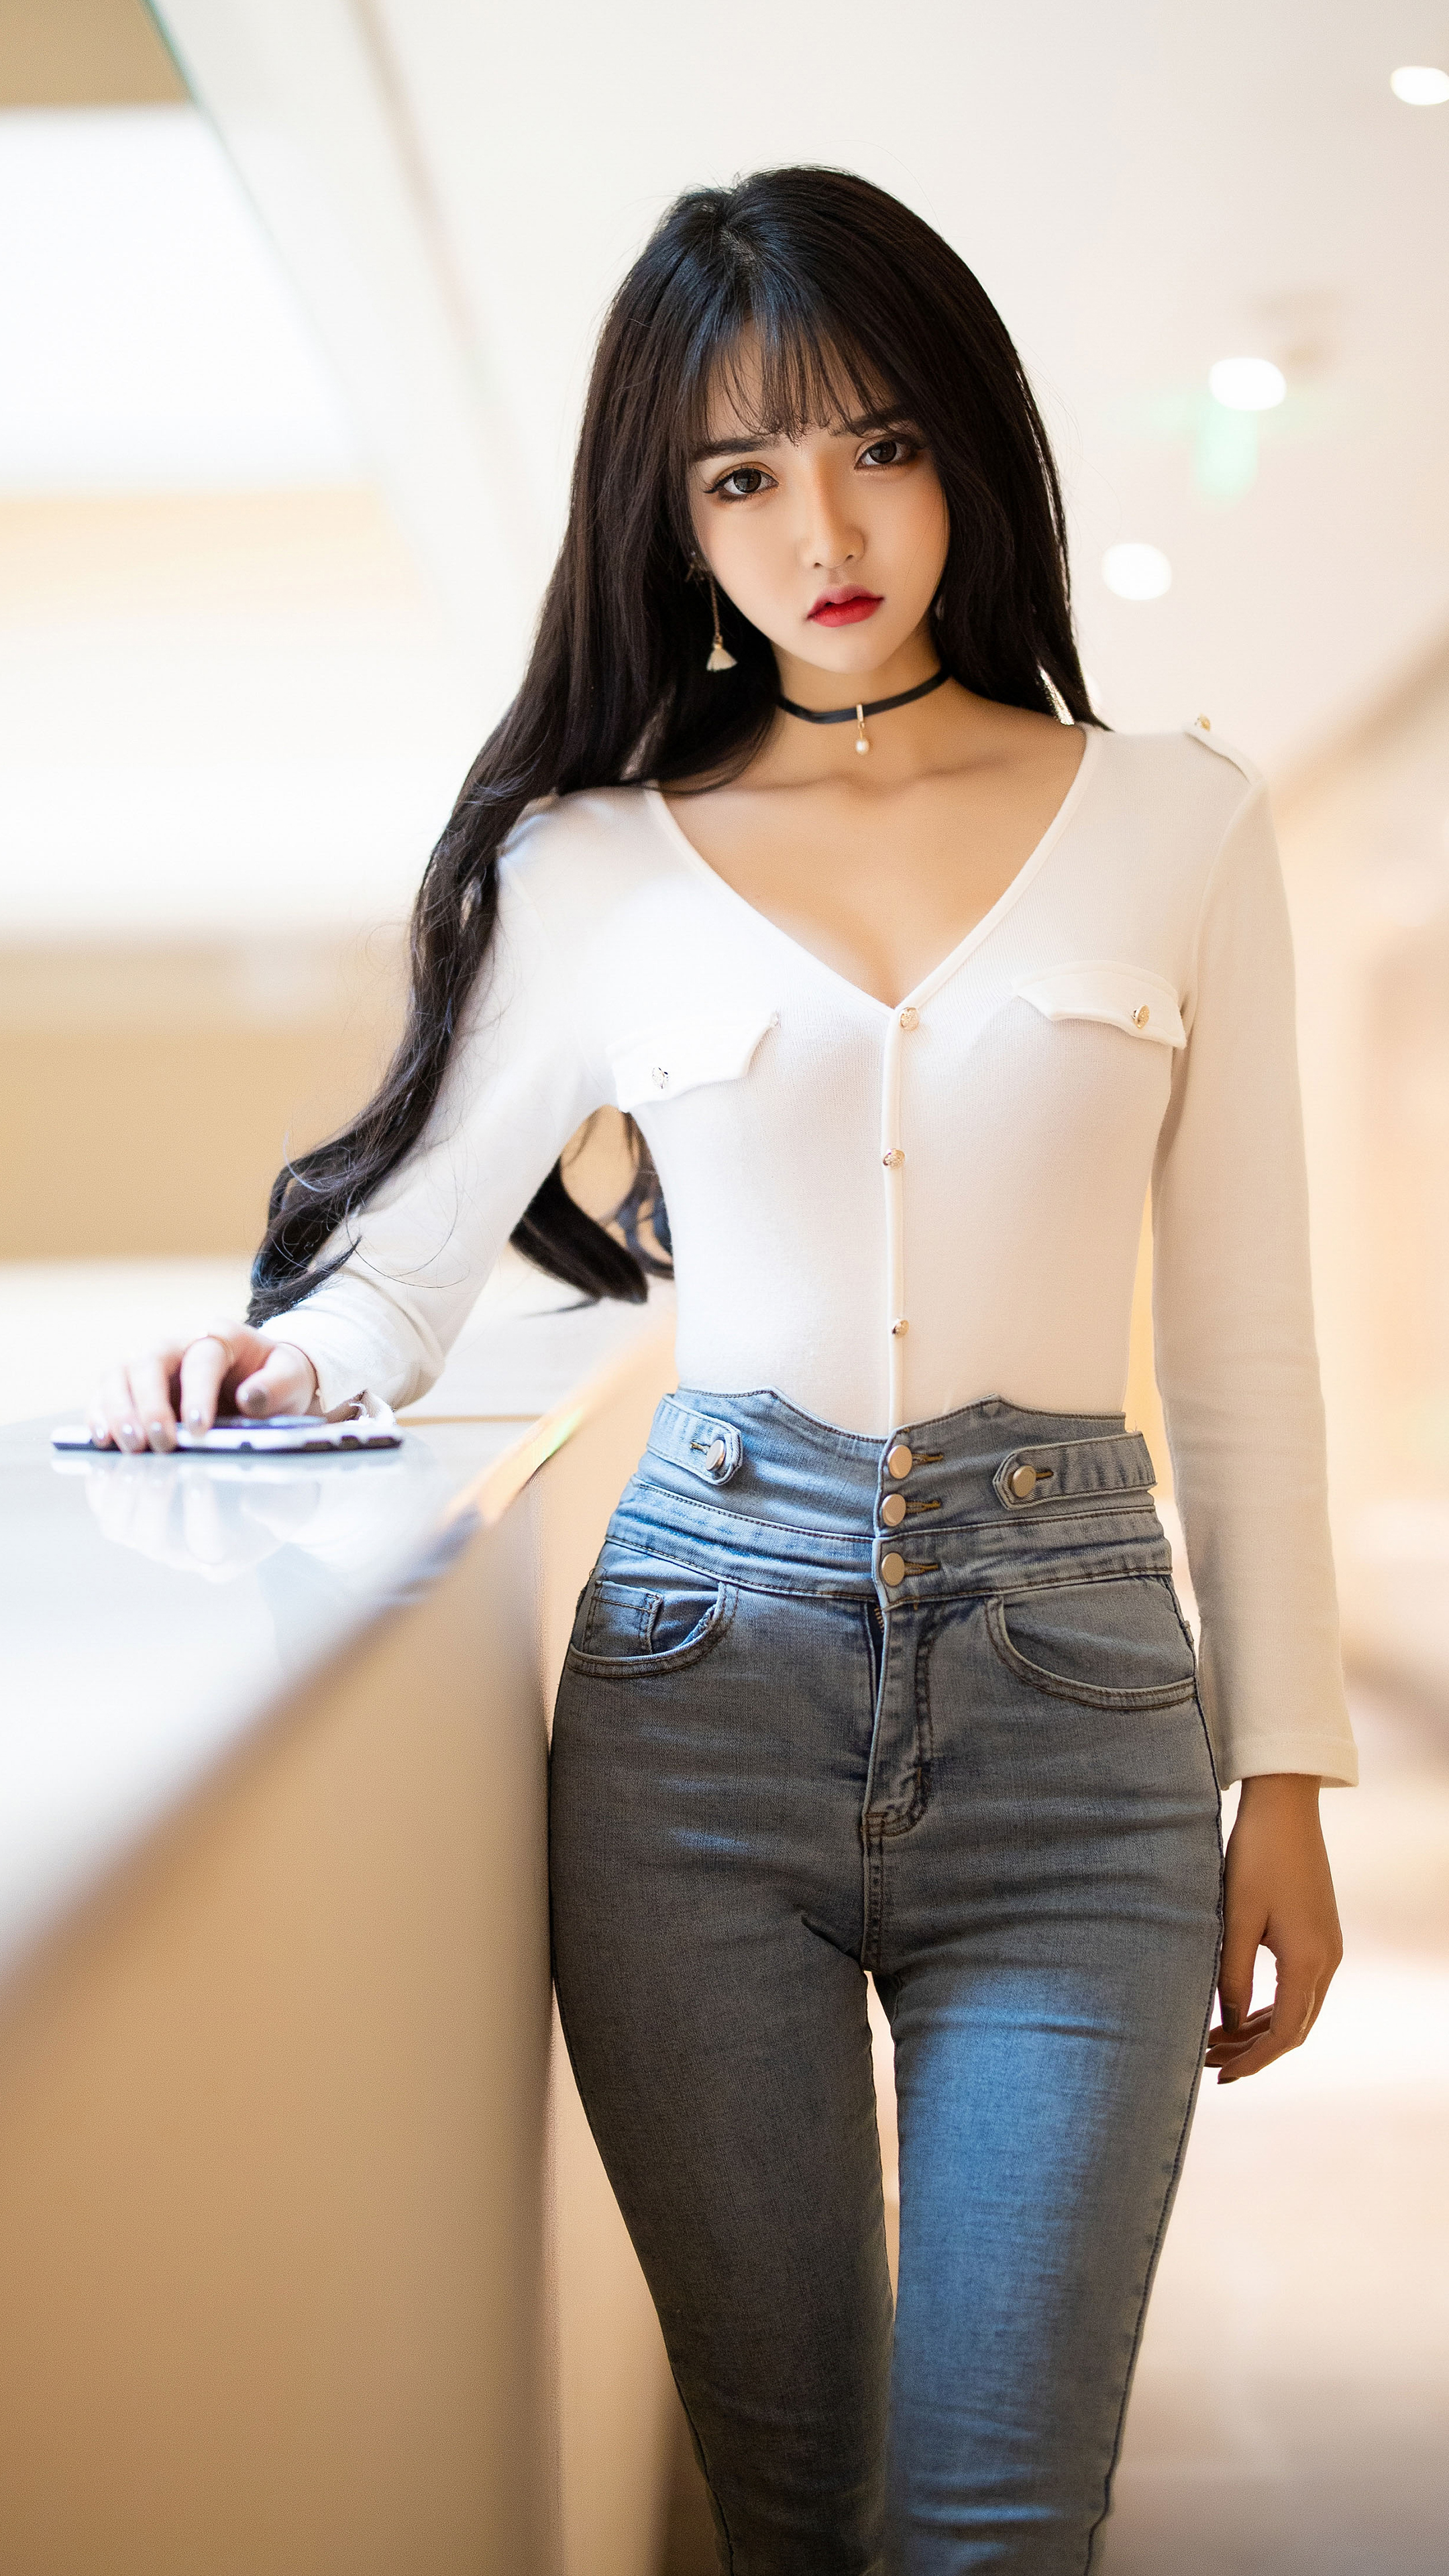 Brunette Long Hair Tight Waist Skinny Jeans White Tops Choker Asian Looking At Viewer Skinny Women I 2160x3840